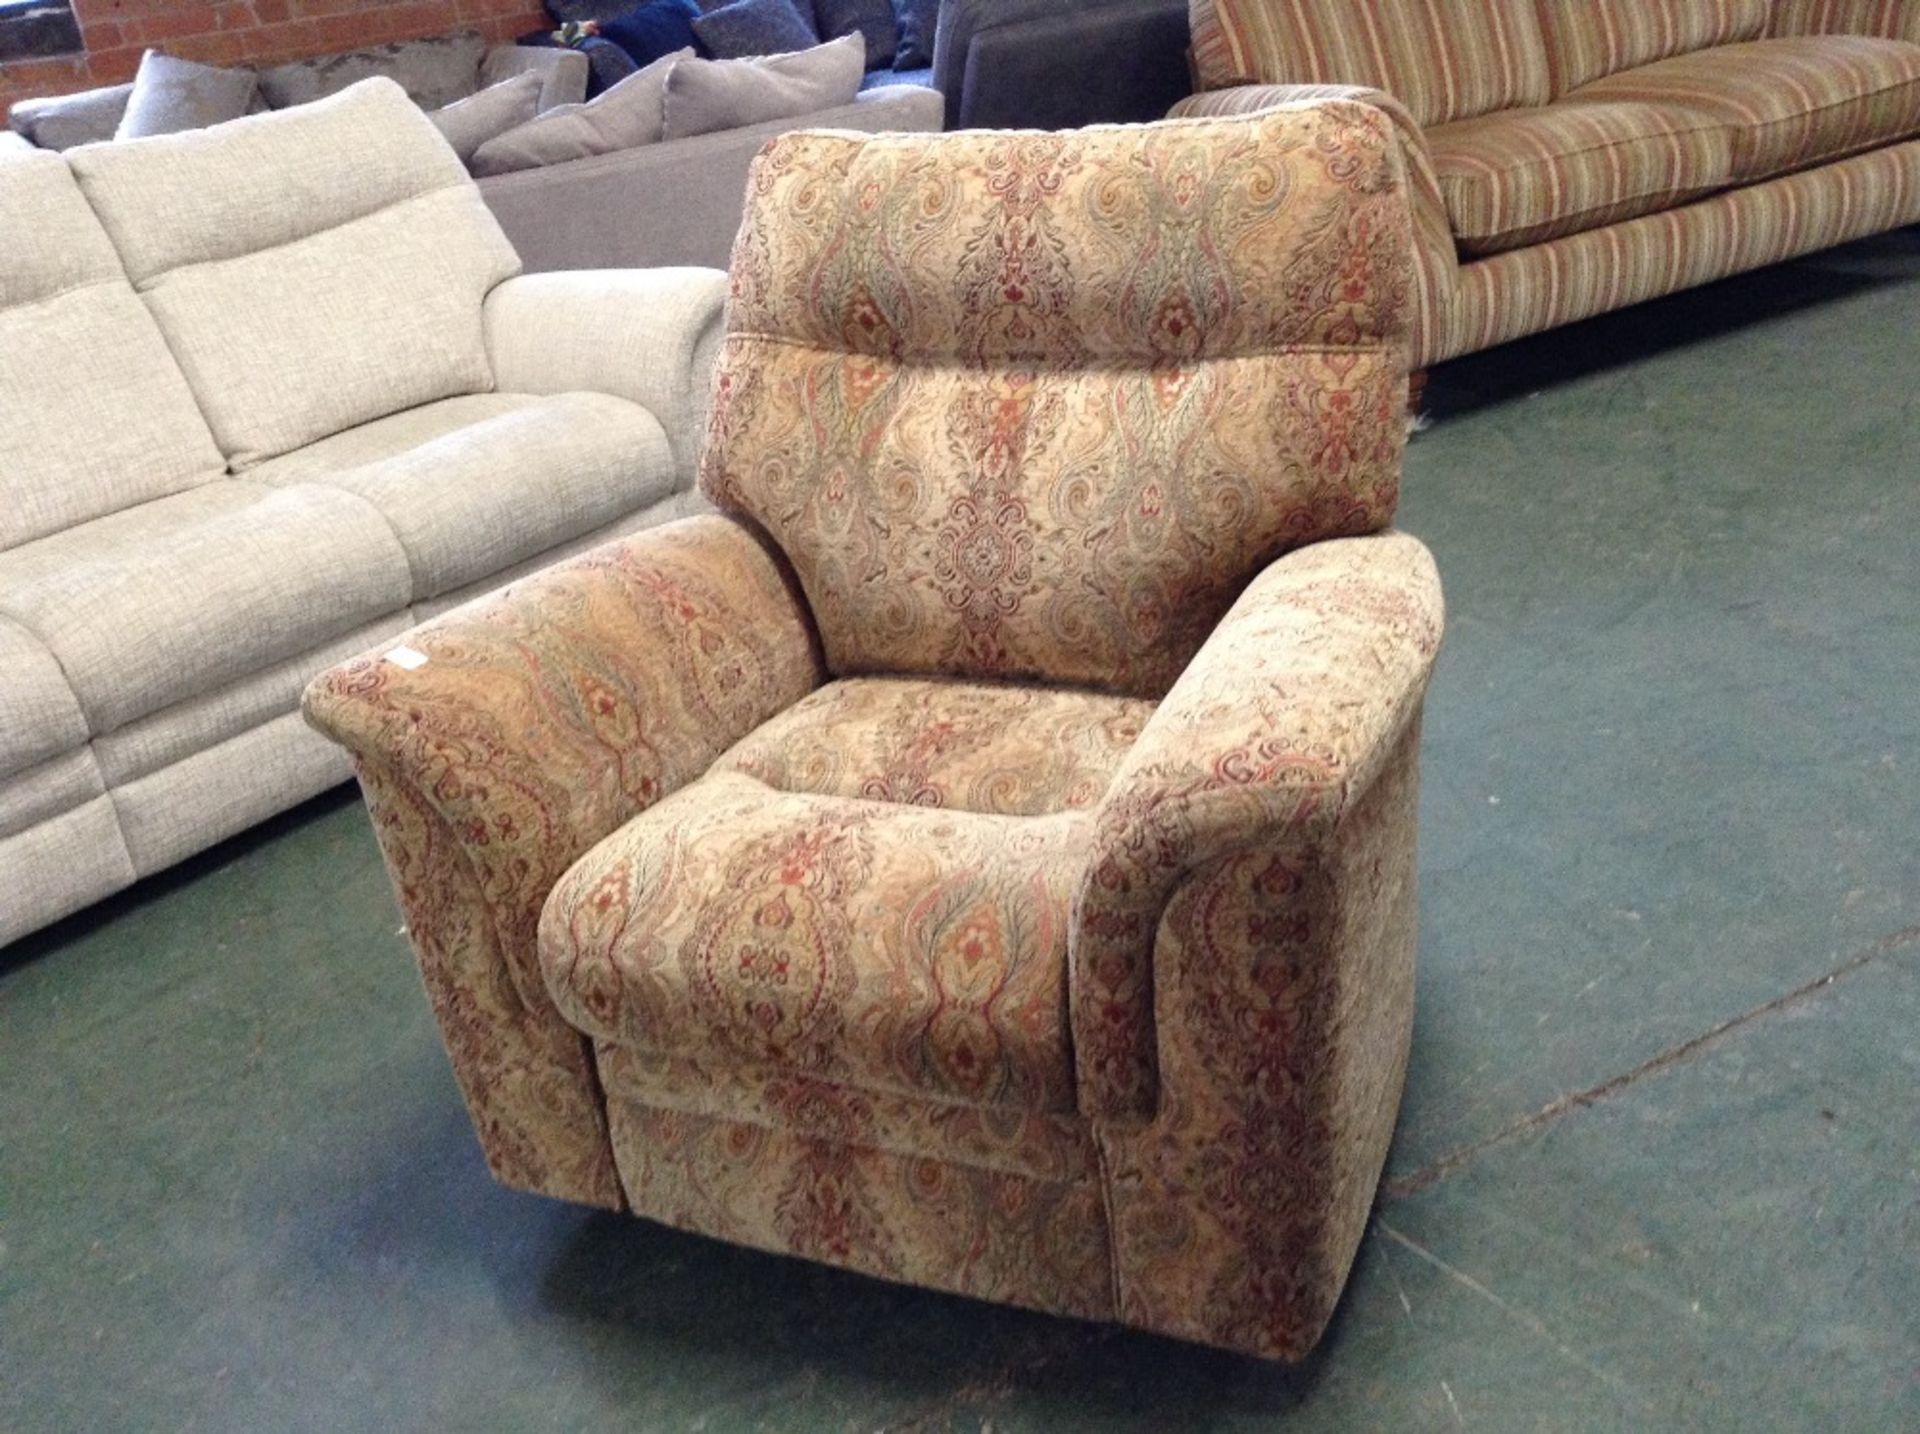 MULTI COLOURED PATTERNED ELECTRIC RECLINING CHAIR